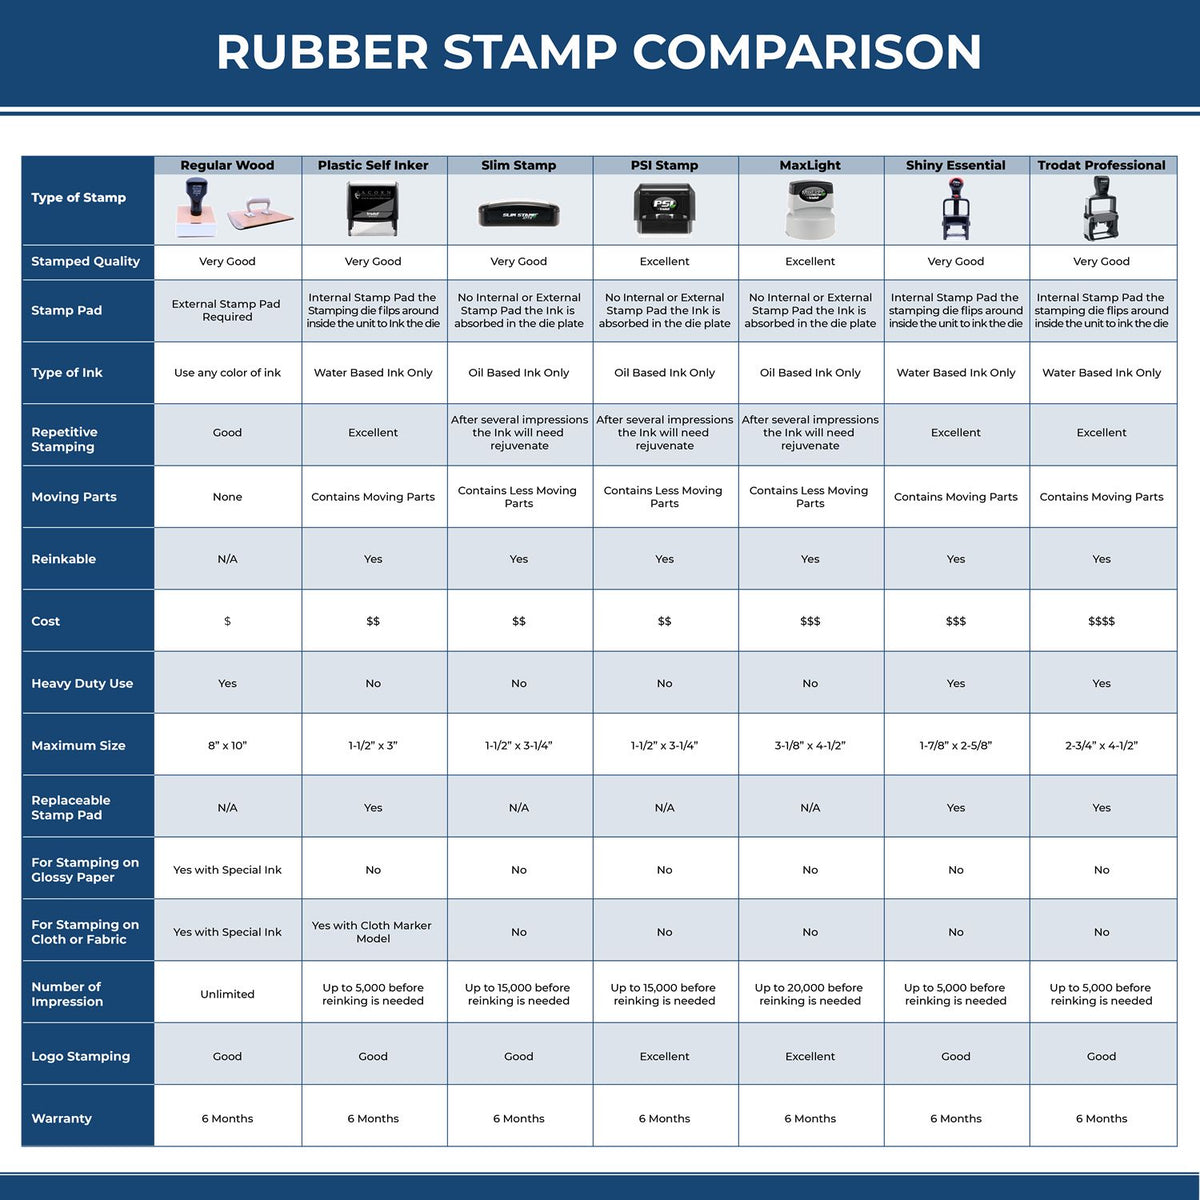 Slim Pre-Inked Faxed on Stamp 4093SLIM Rubber Stamp Comparison